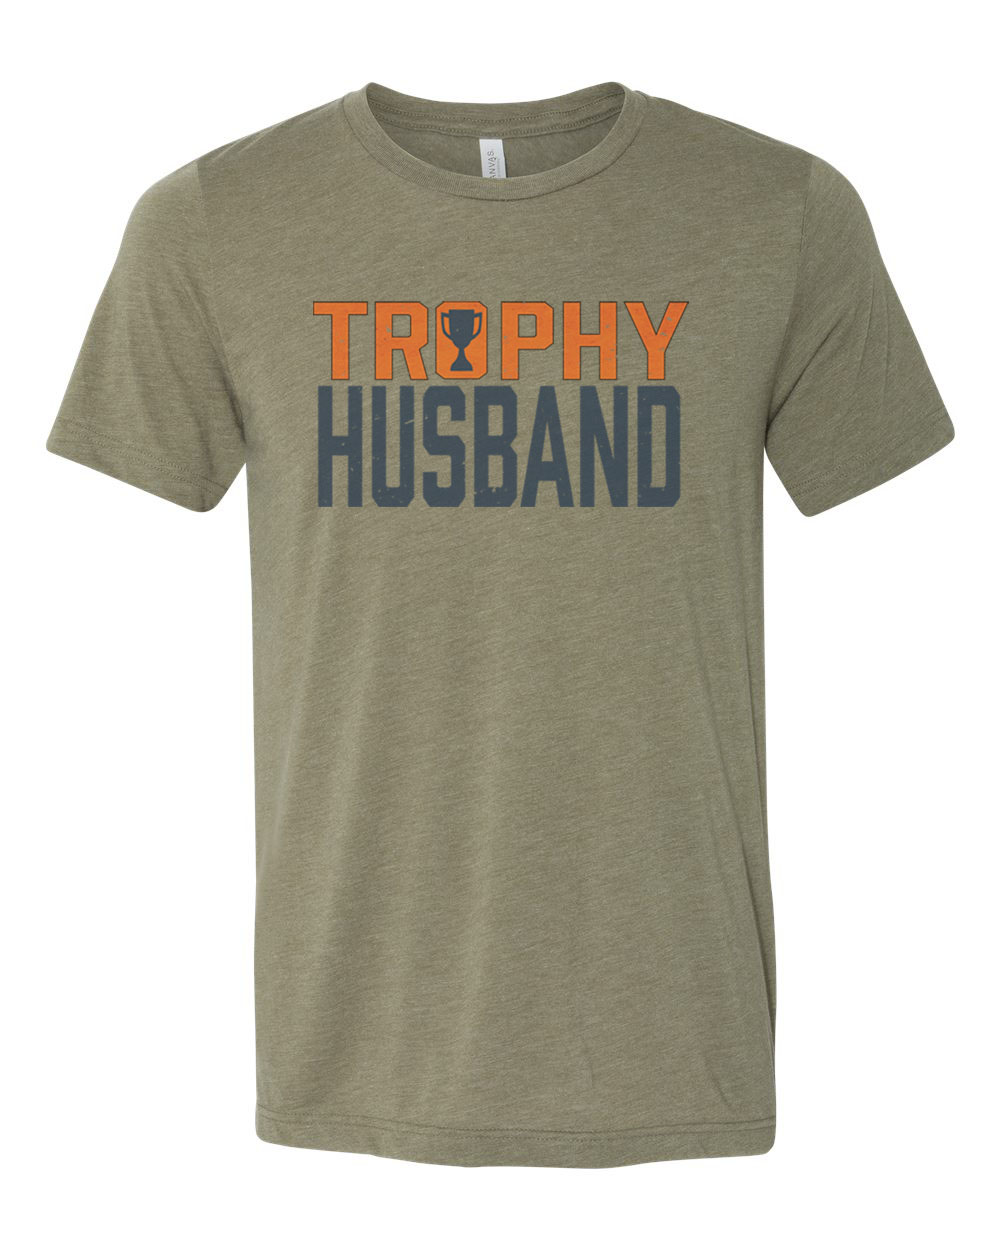 Trophy Husband Shirt, Gift For Him, Hubby Shirt, Trophy Husband, Father's Day Gift, Gift For Husband, Funny Husband Shirt, Husband Gift, Heather Olive, 2XL - image 1 of 1